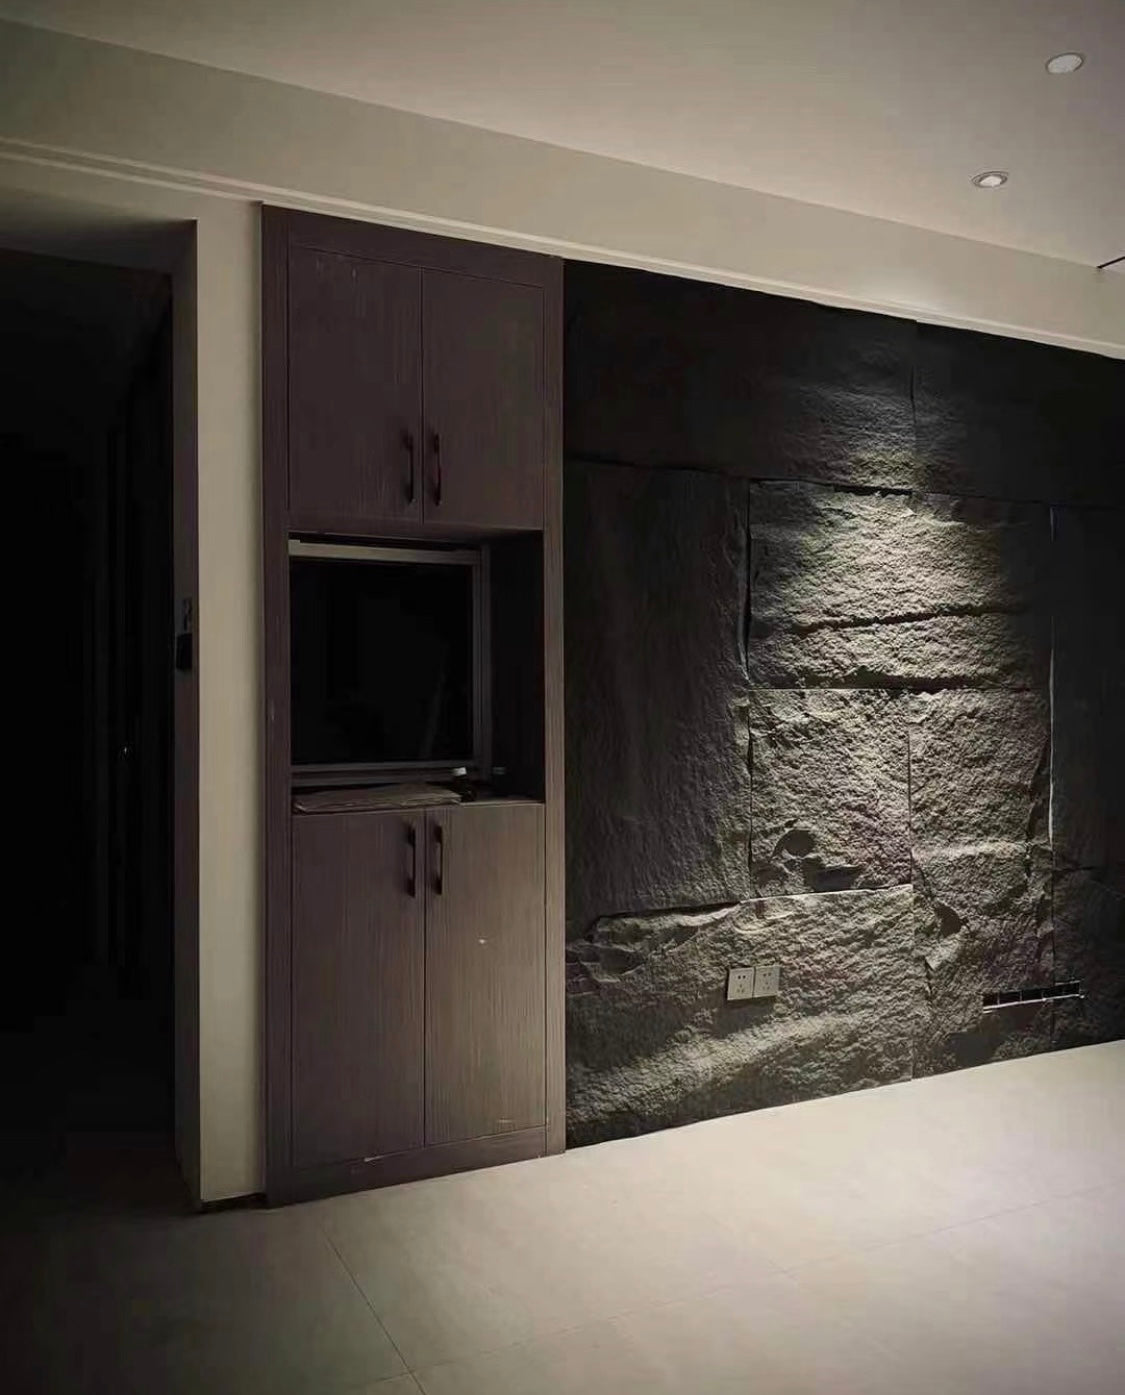 Artificial stone wall panels look